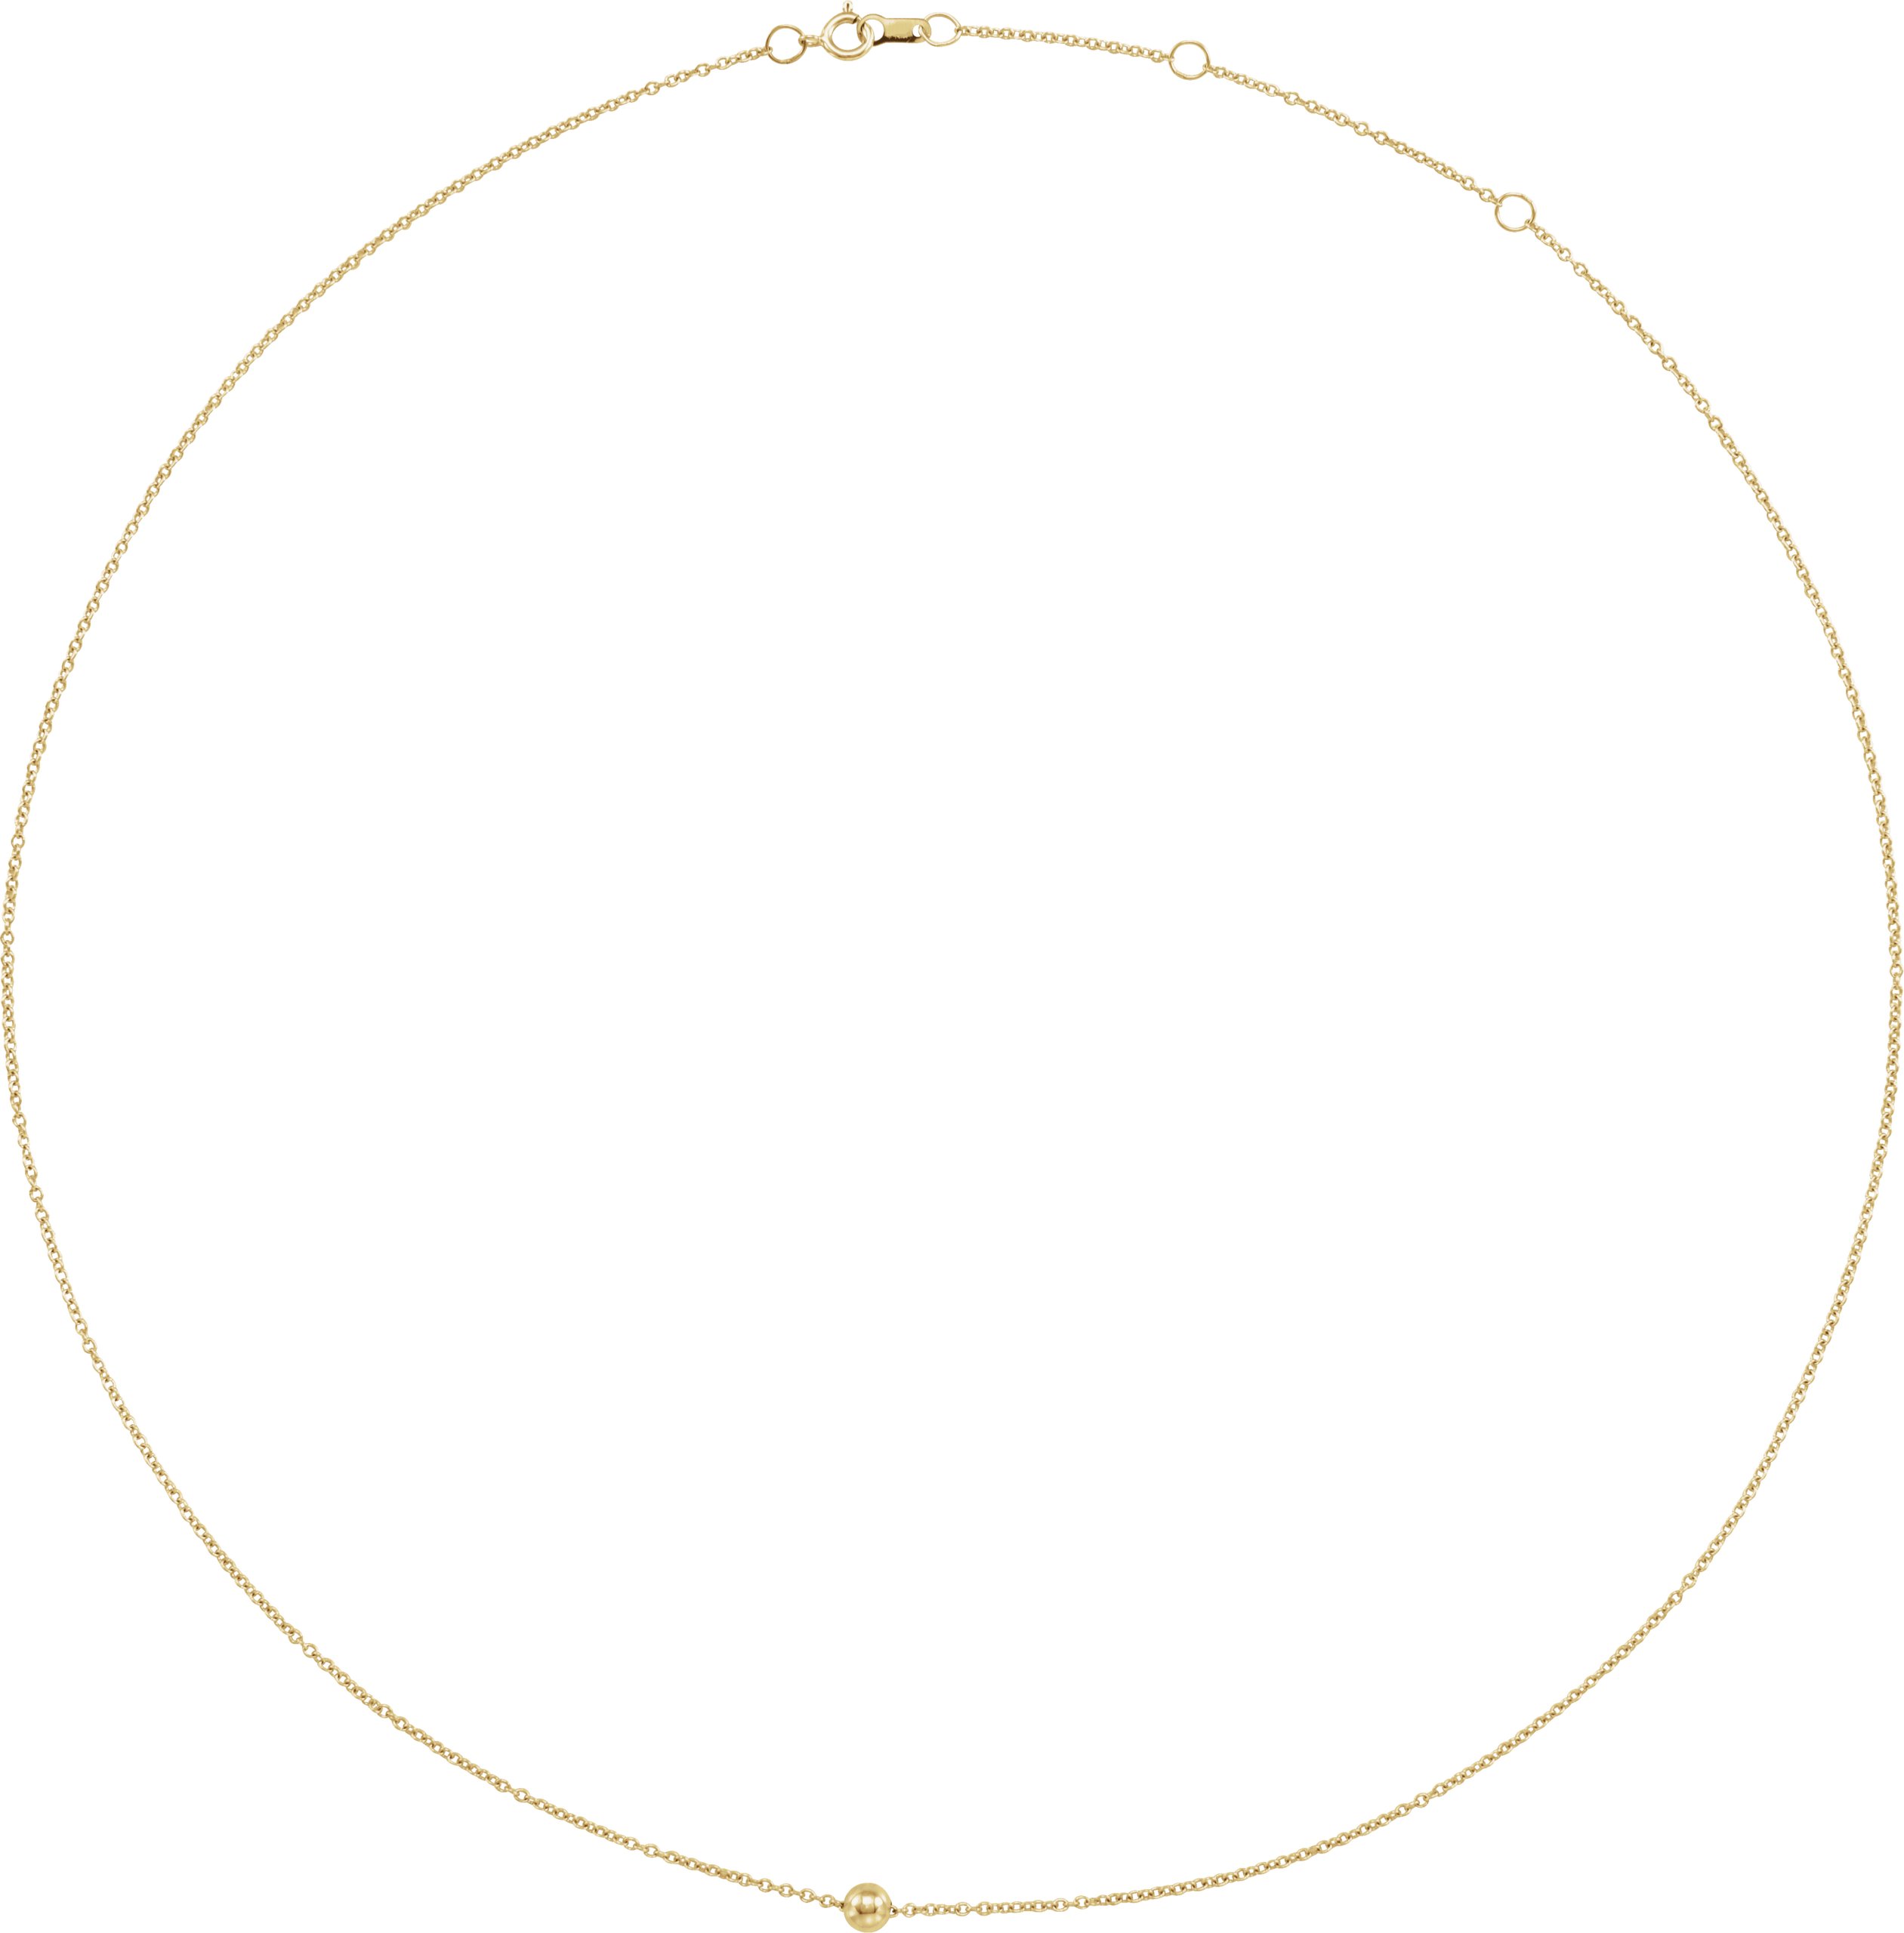 14K Yellow 4 mm Ball 16-18" Necklace